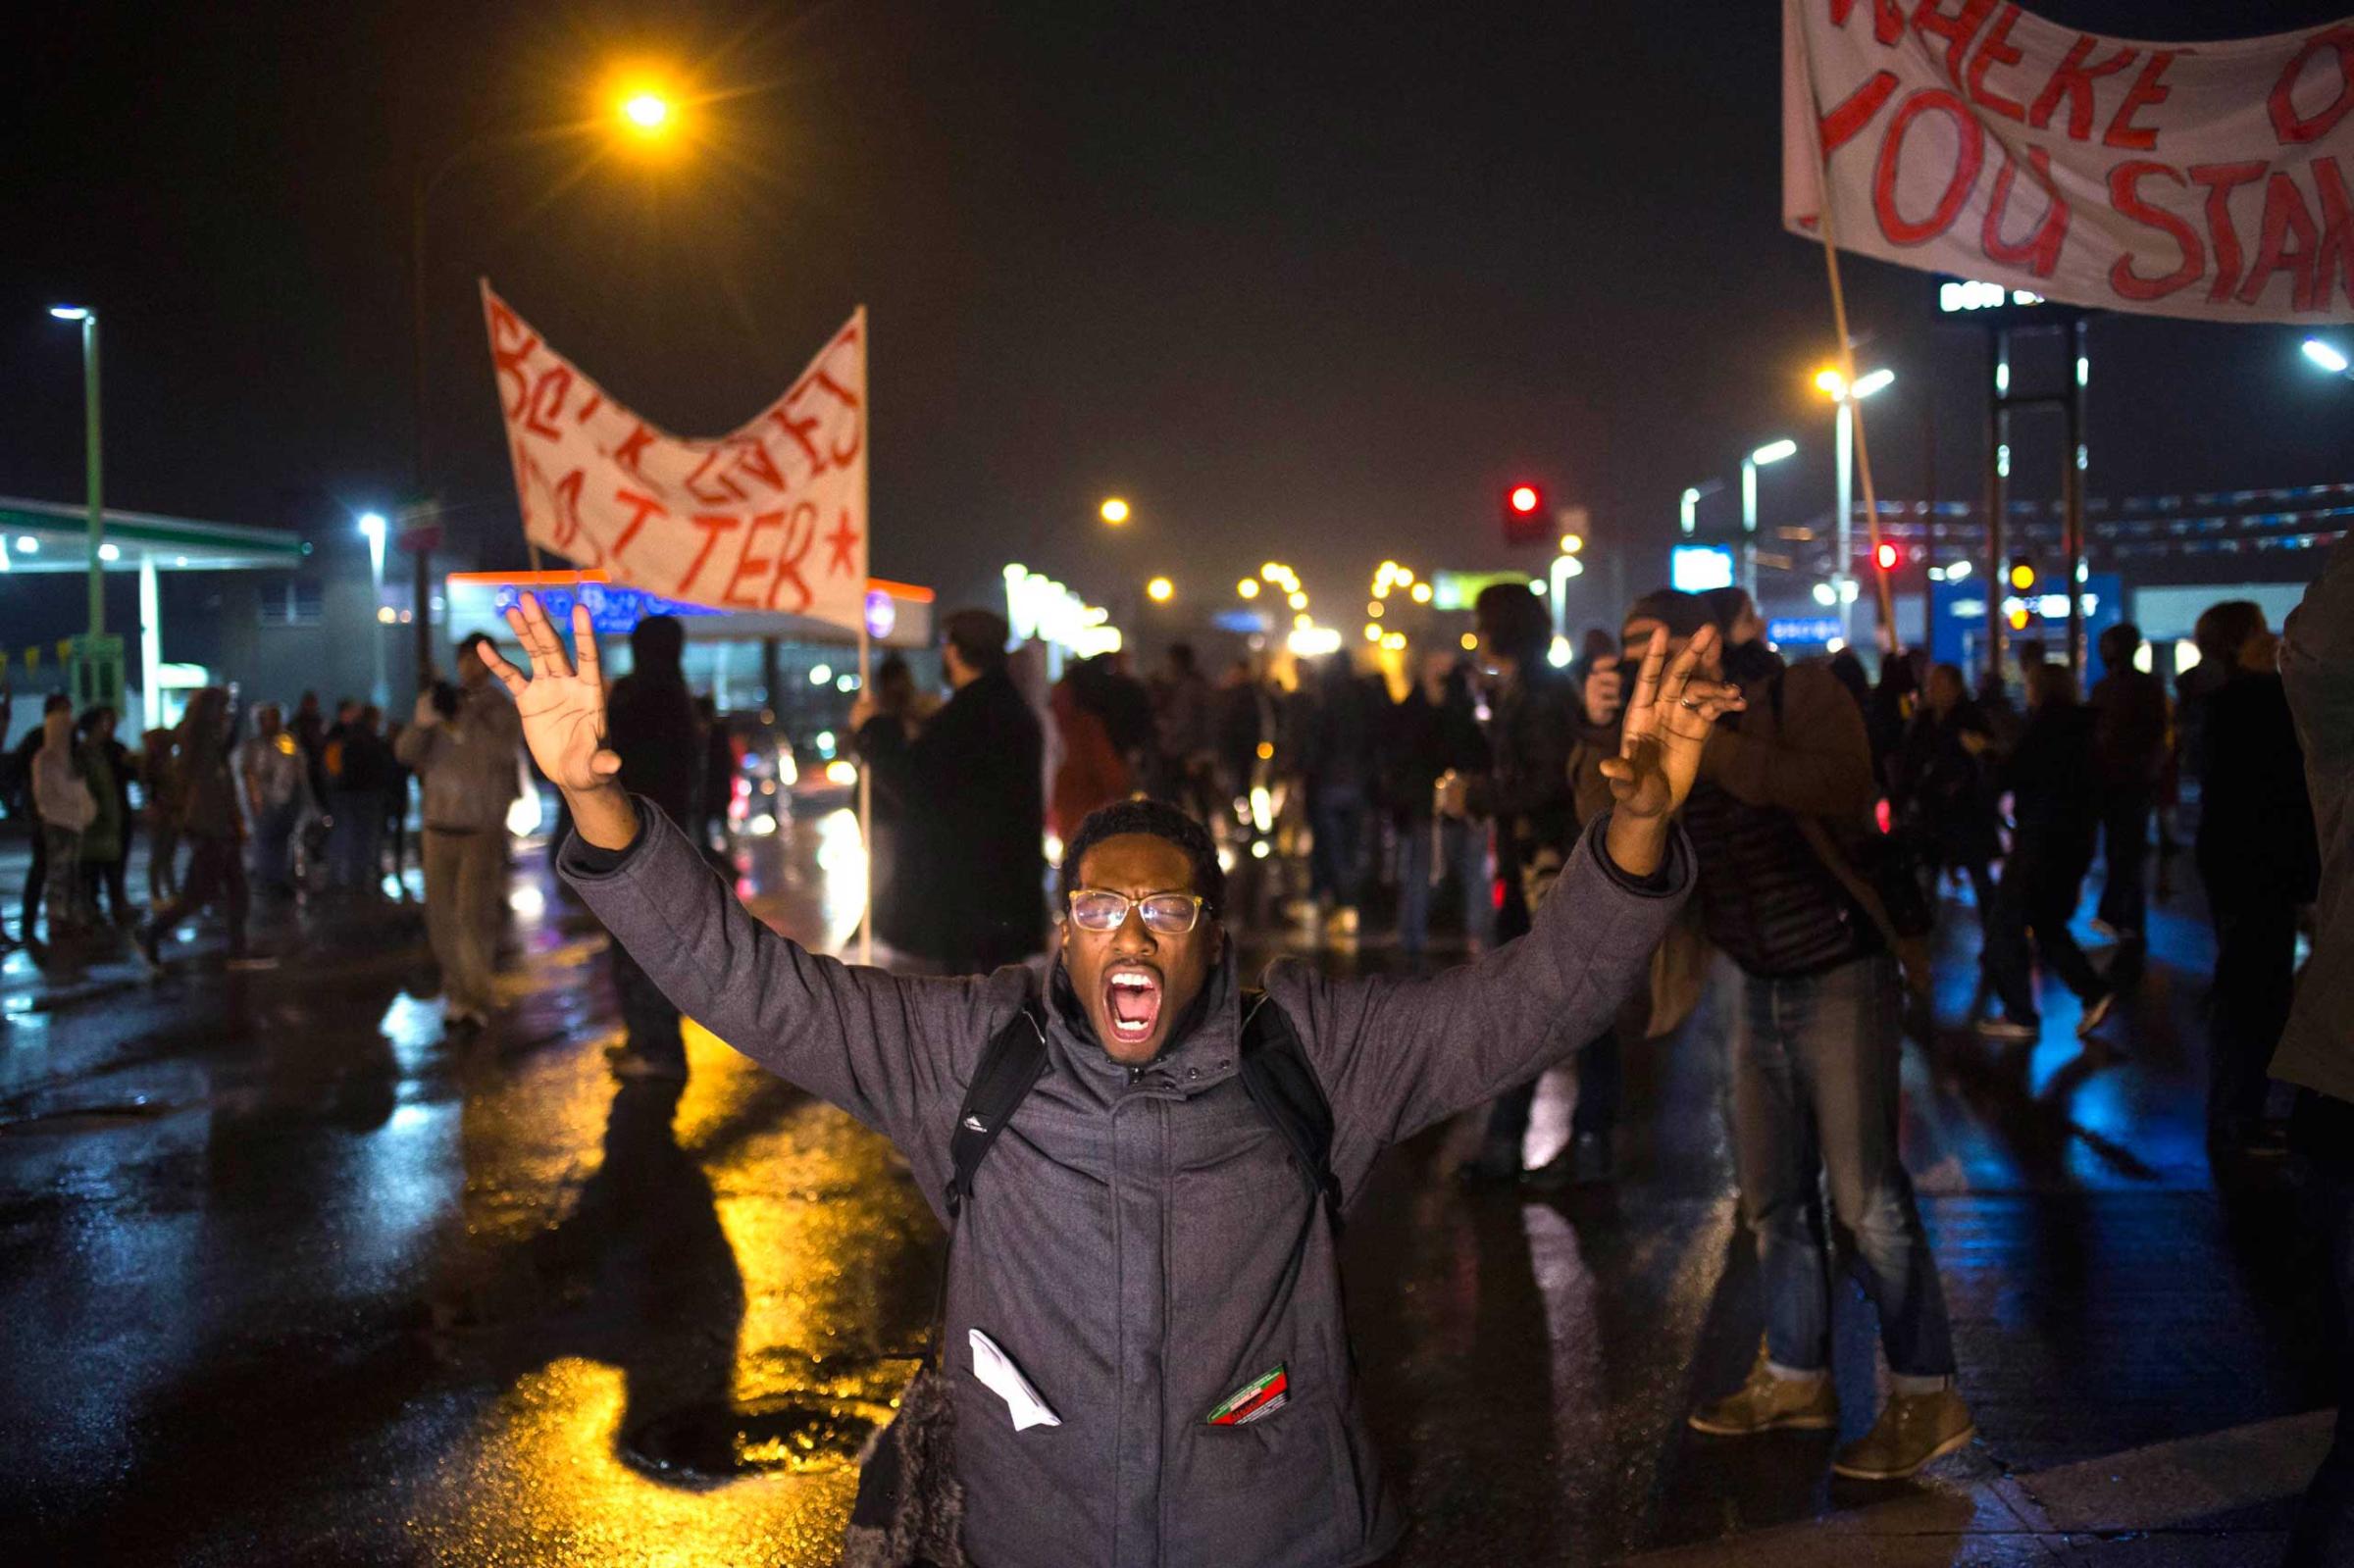 A protester, demanding the criminal indictment of a white police officer who shot dead an unarmed black teenager in August, shouts slogans while stopping traffic while marching through a suburb in St. Louis, Missouri